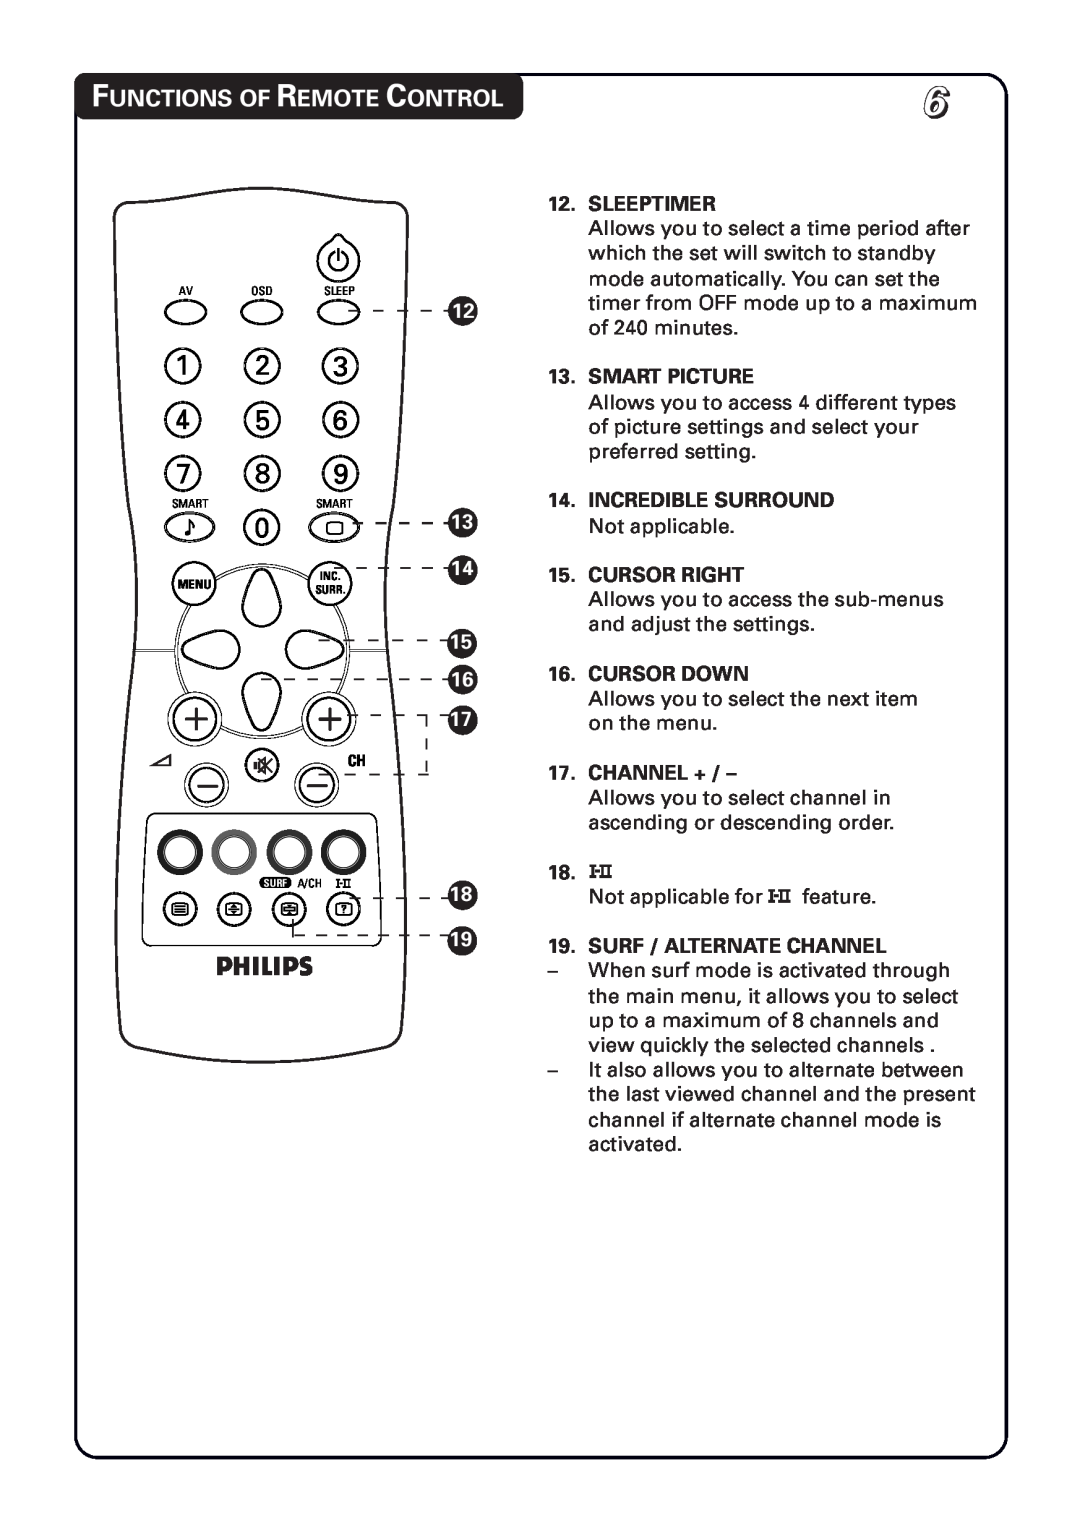 Philips 21PT1582, 20PT1582 manual 1 2 4 5, Functions Of Remote Control, Sleeptimer, Smart Picture, Cursor Down, Channel + 